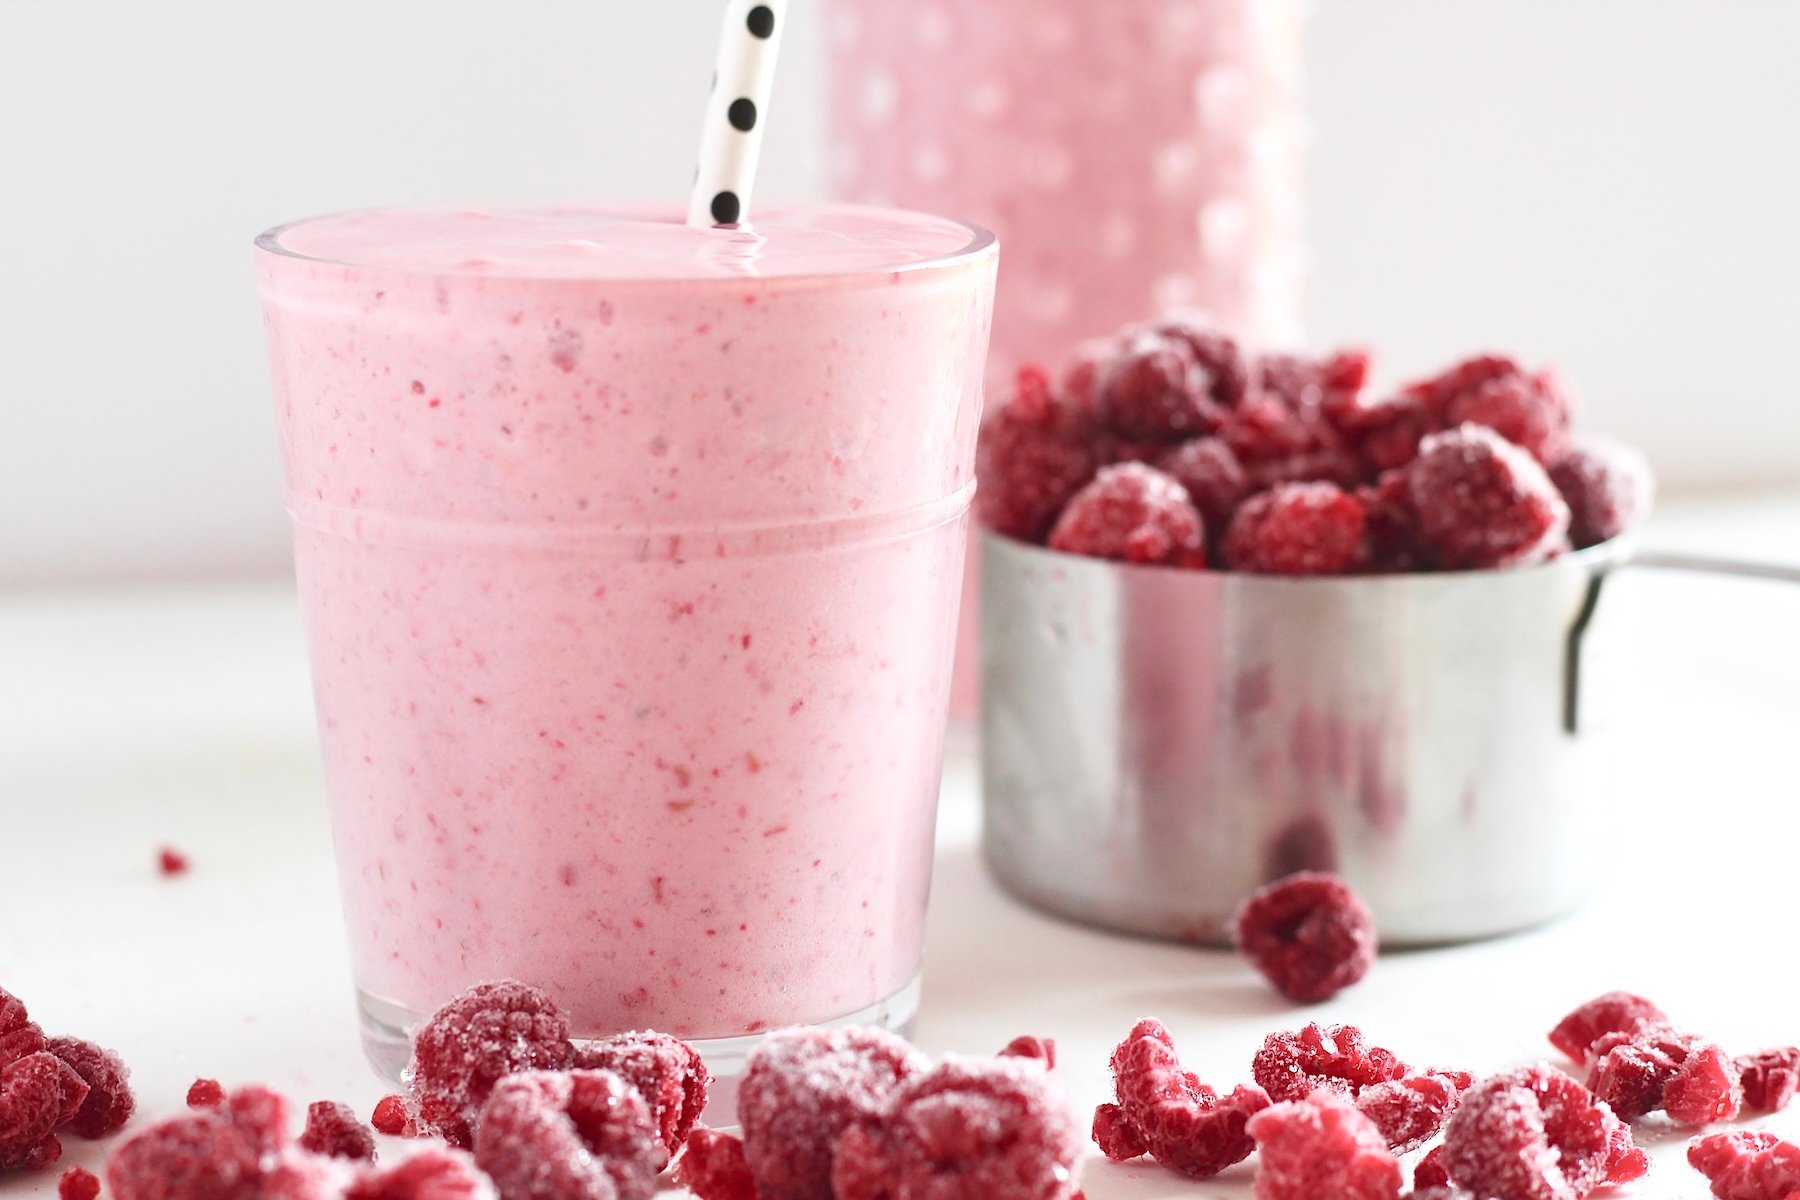 12 Low-sugar, healthy smoothie recipes to fuel your day